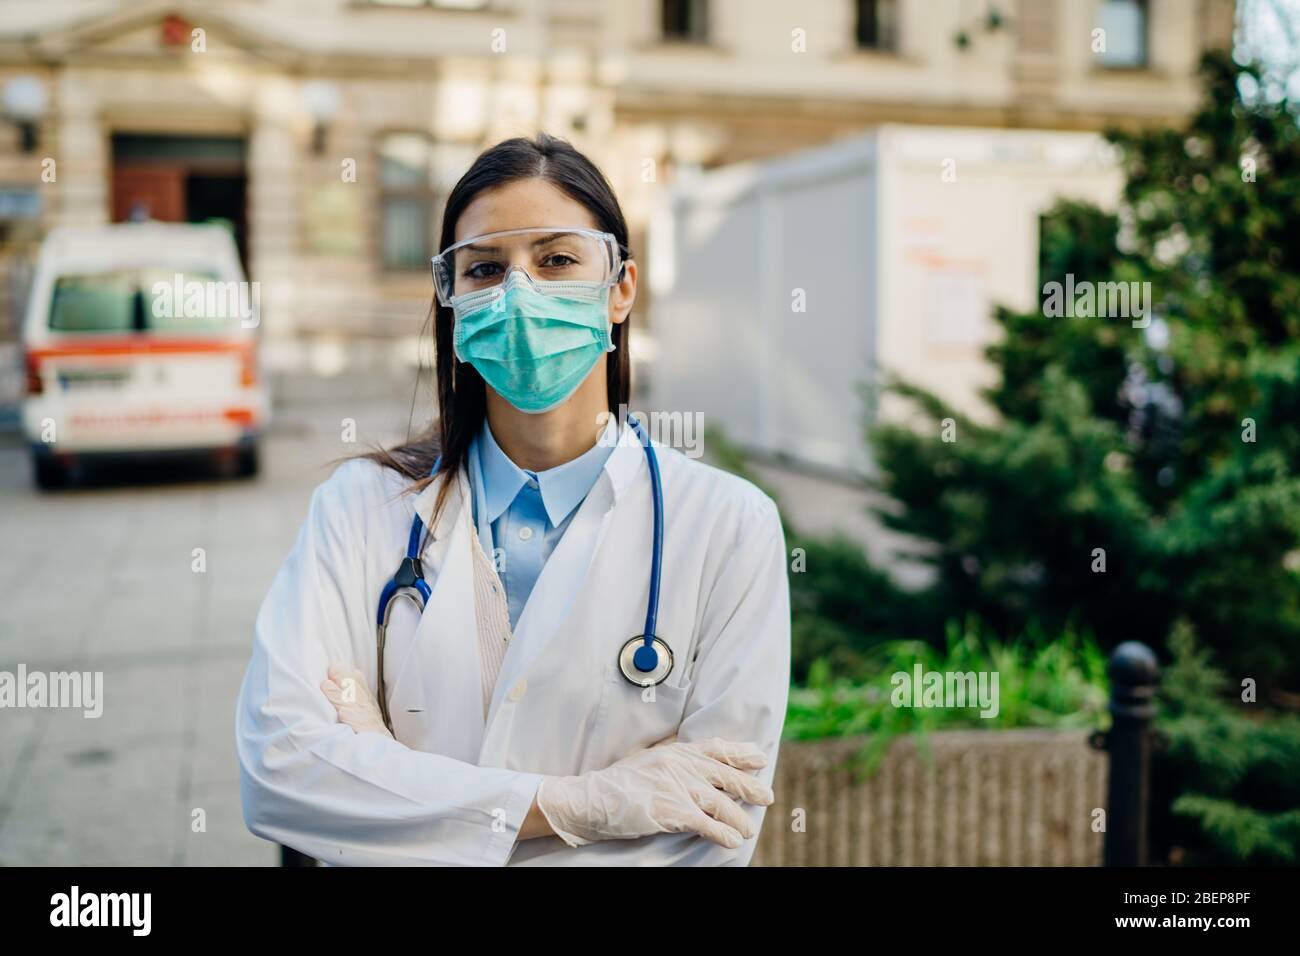 Brave optimistic paramedic in the front lines,working in a isolation hospital facility with infected patients.Covid-19 emergency room triage doctor wi Stock Photo